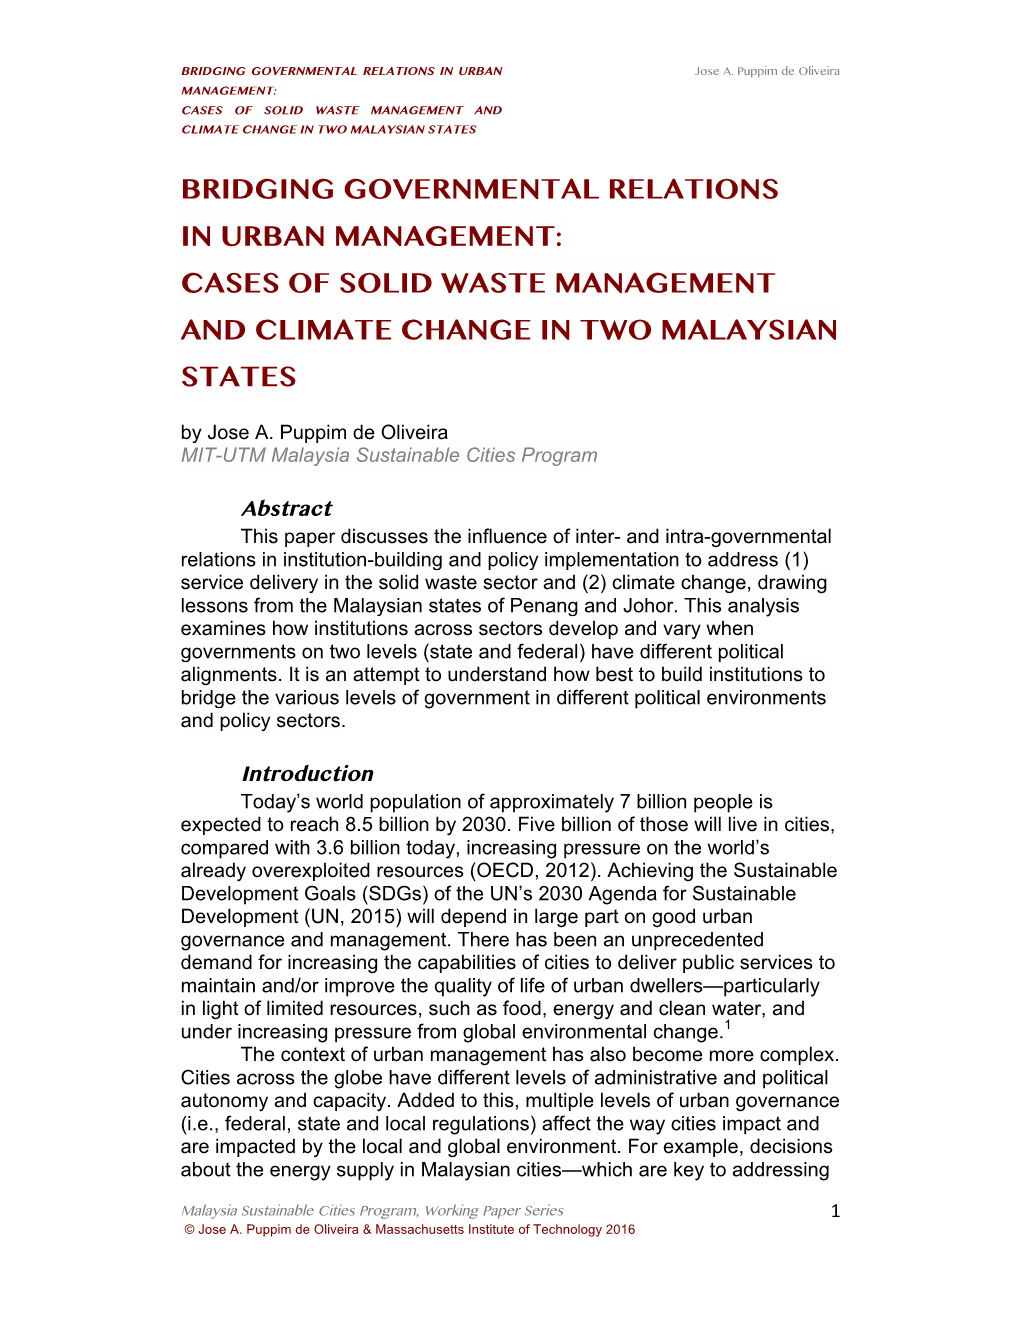 Cases of Solid Waste Management and Climate Change in Two Malaysian States